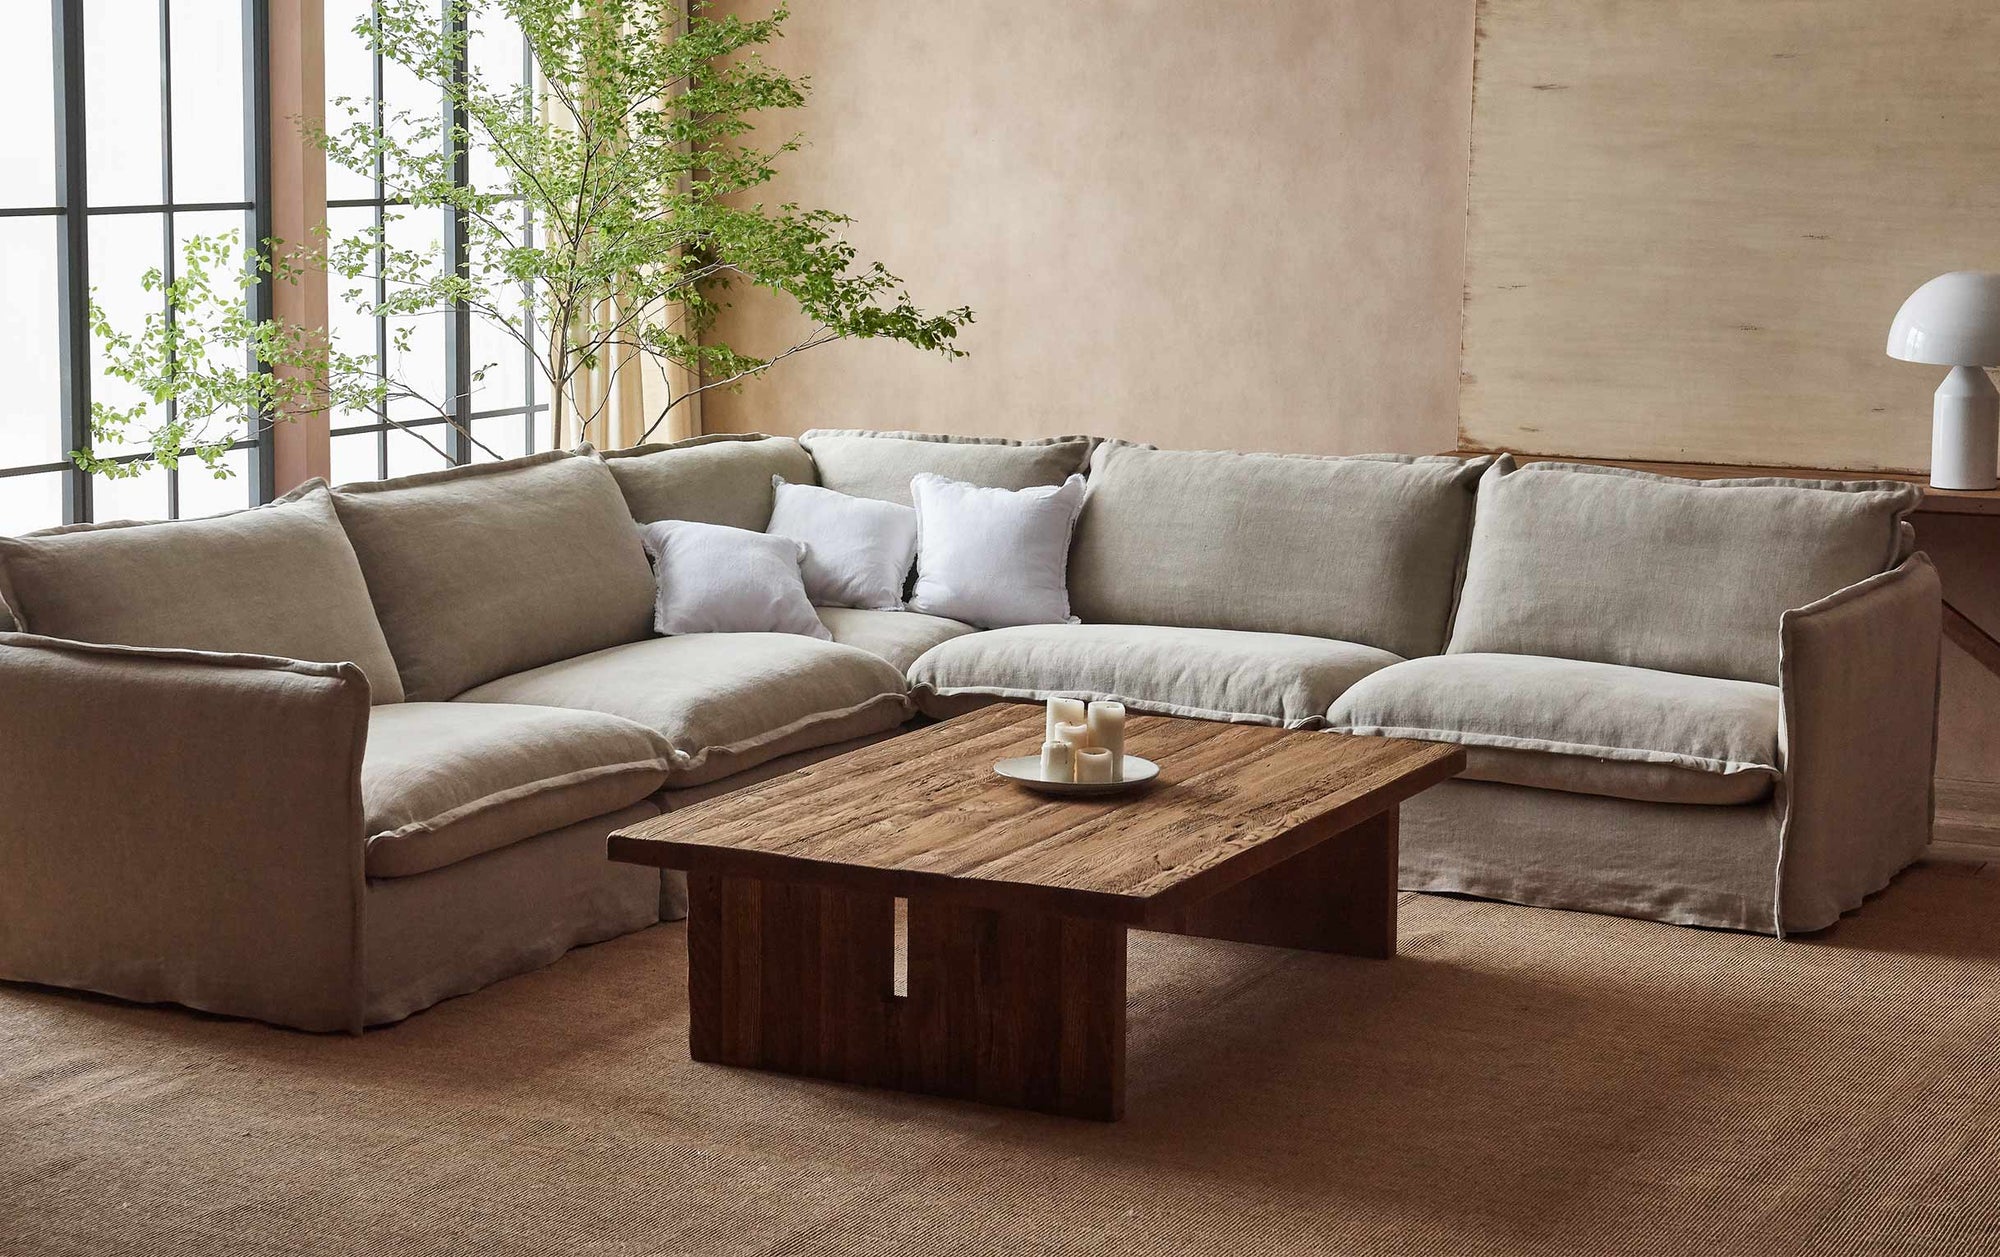 Kai Coffee Table placed in front of the Neva Corner Sectional Sofa